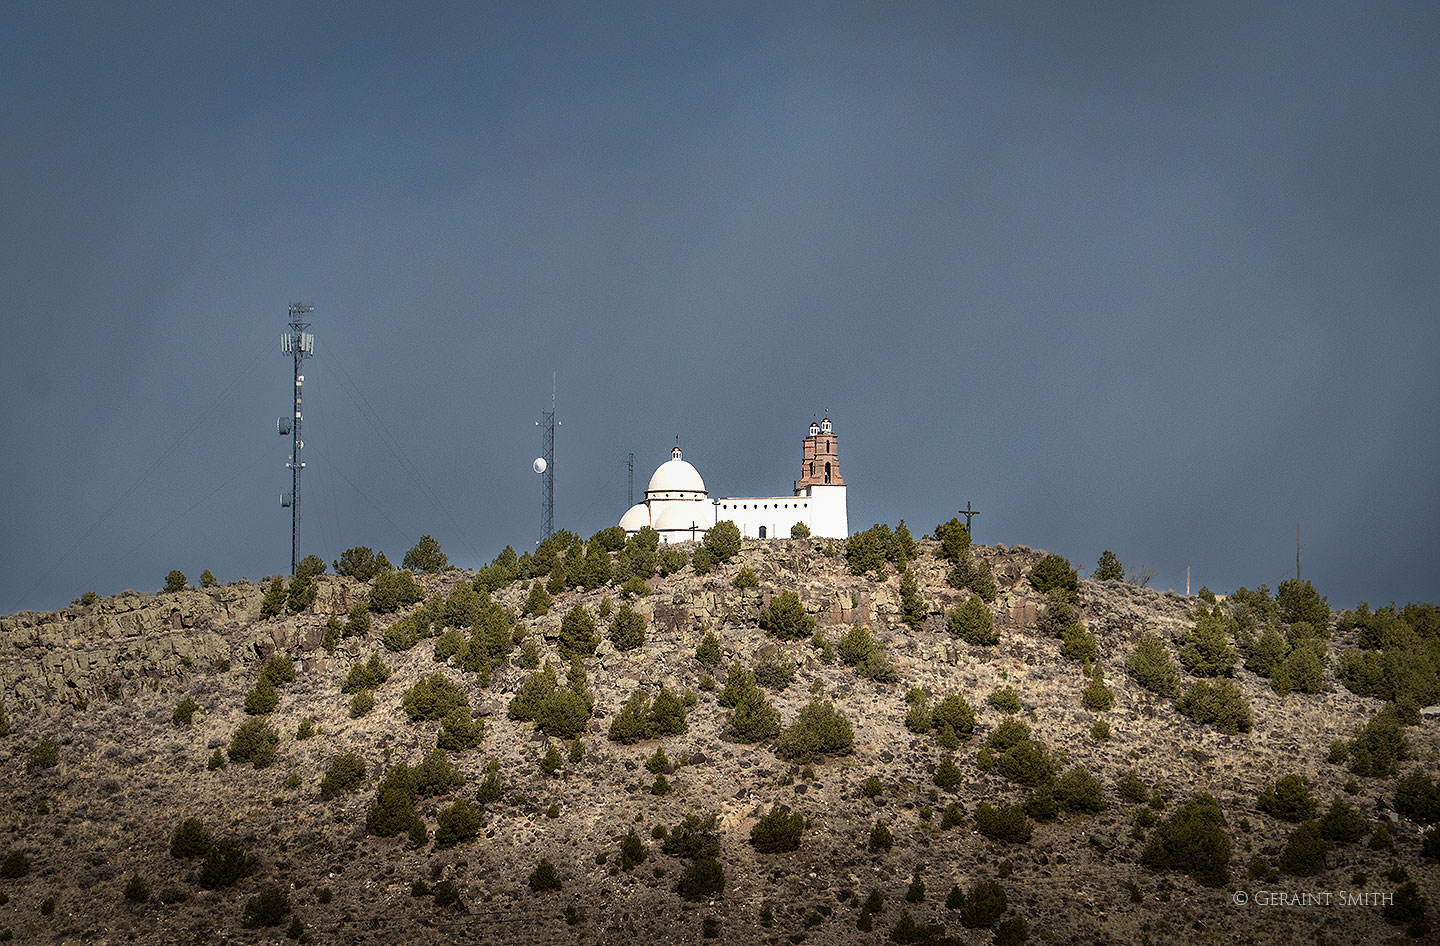 Stations of the cross shrine, and cell towers, sunday drive to San Luis Colorado